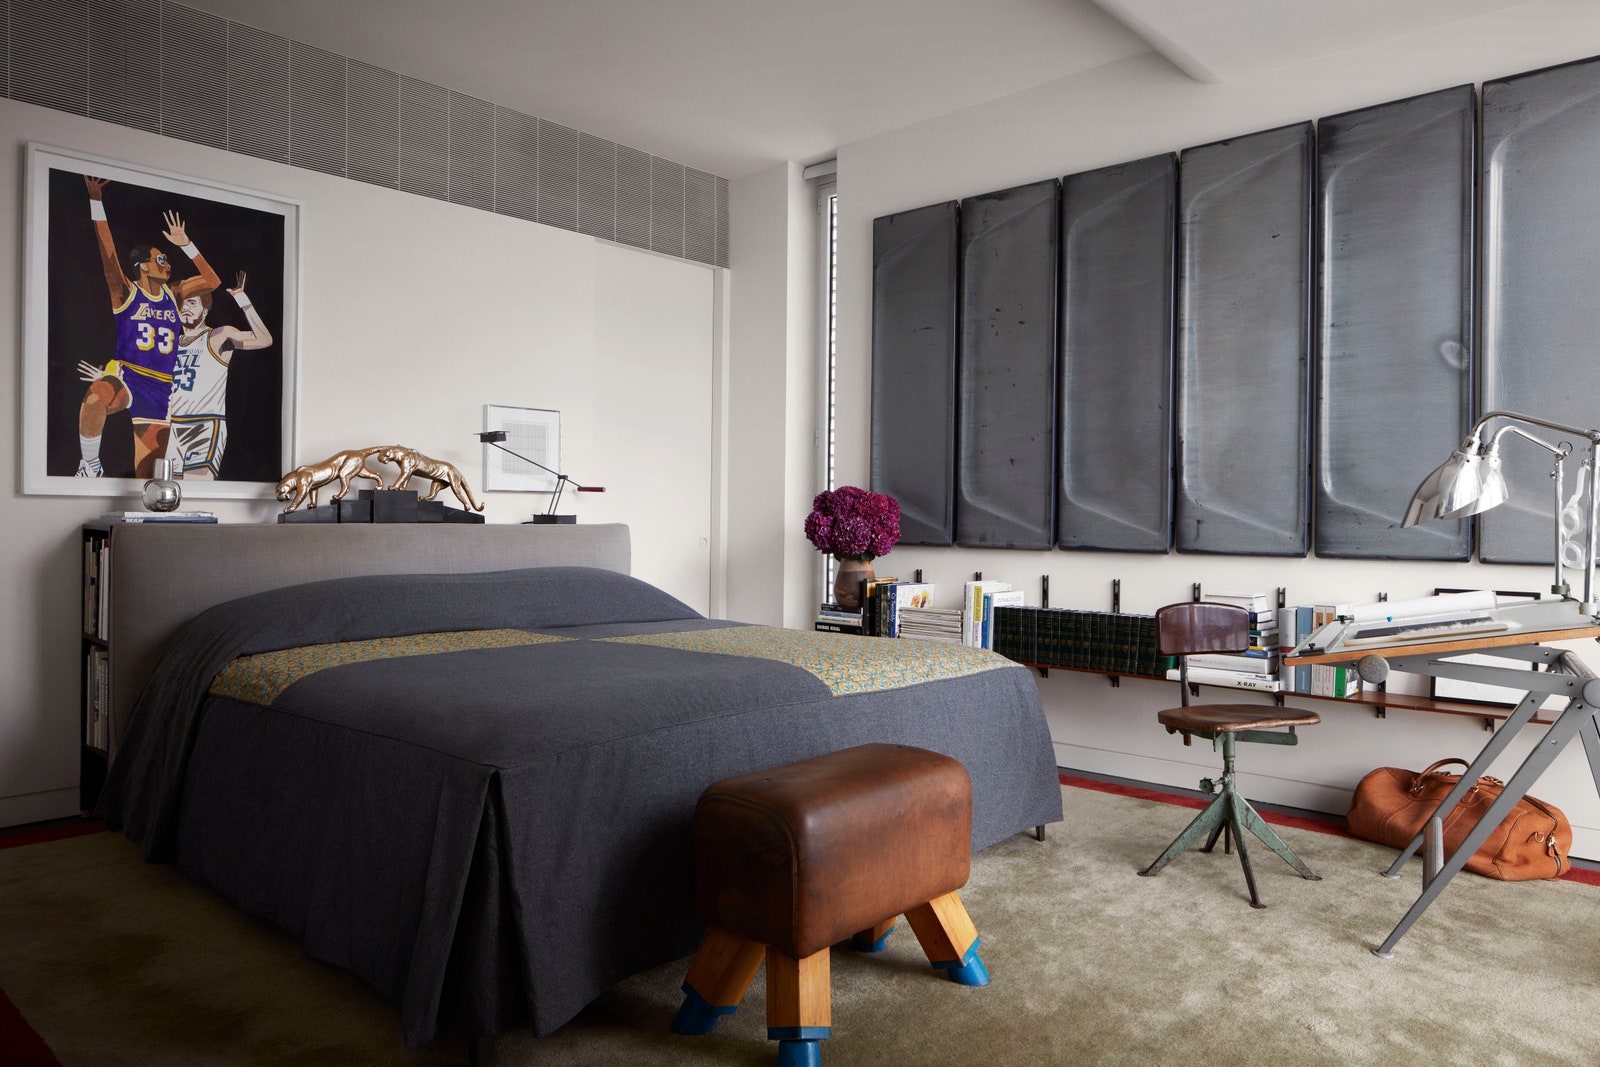 In Andre Mellones Manhattan home the toneddown bed allows the surrounding art and decor to flourish.